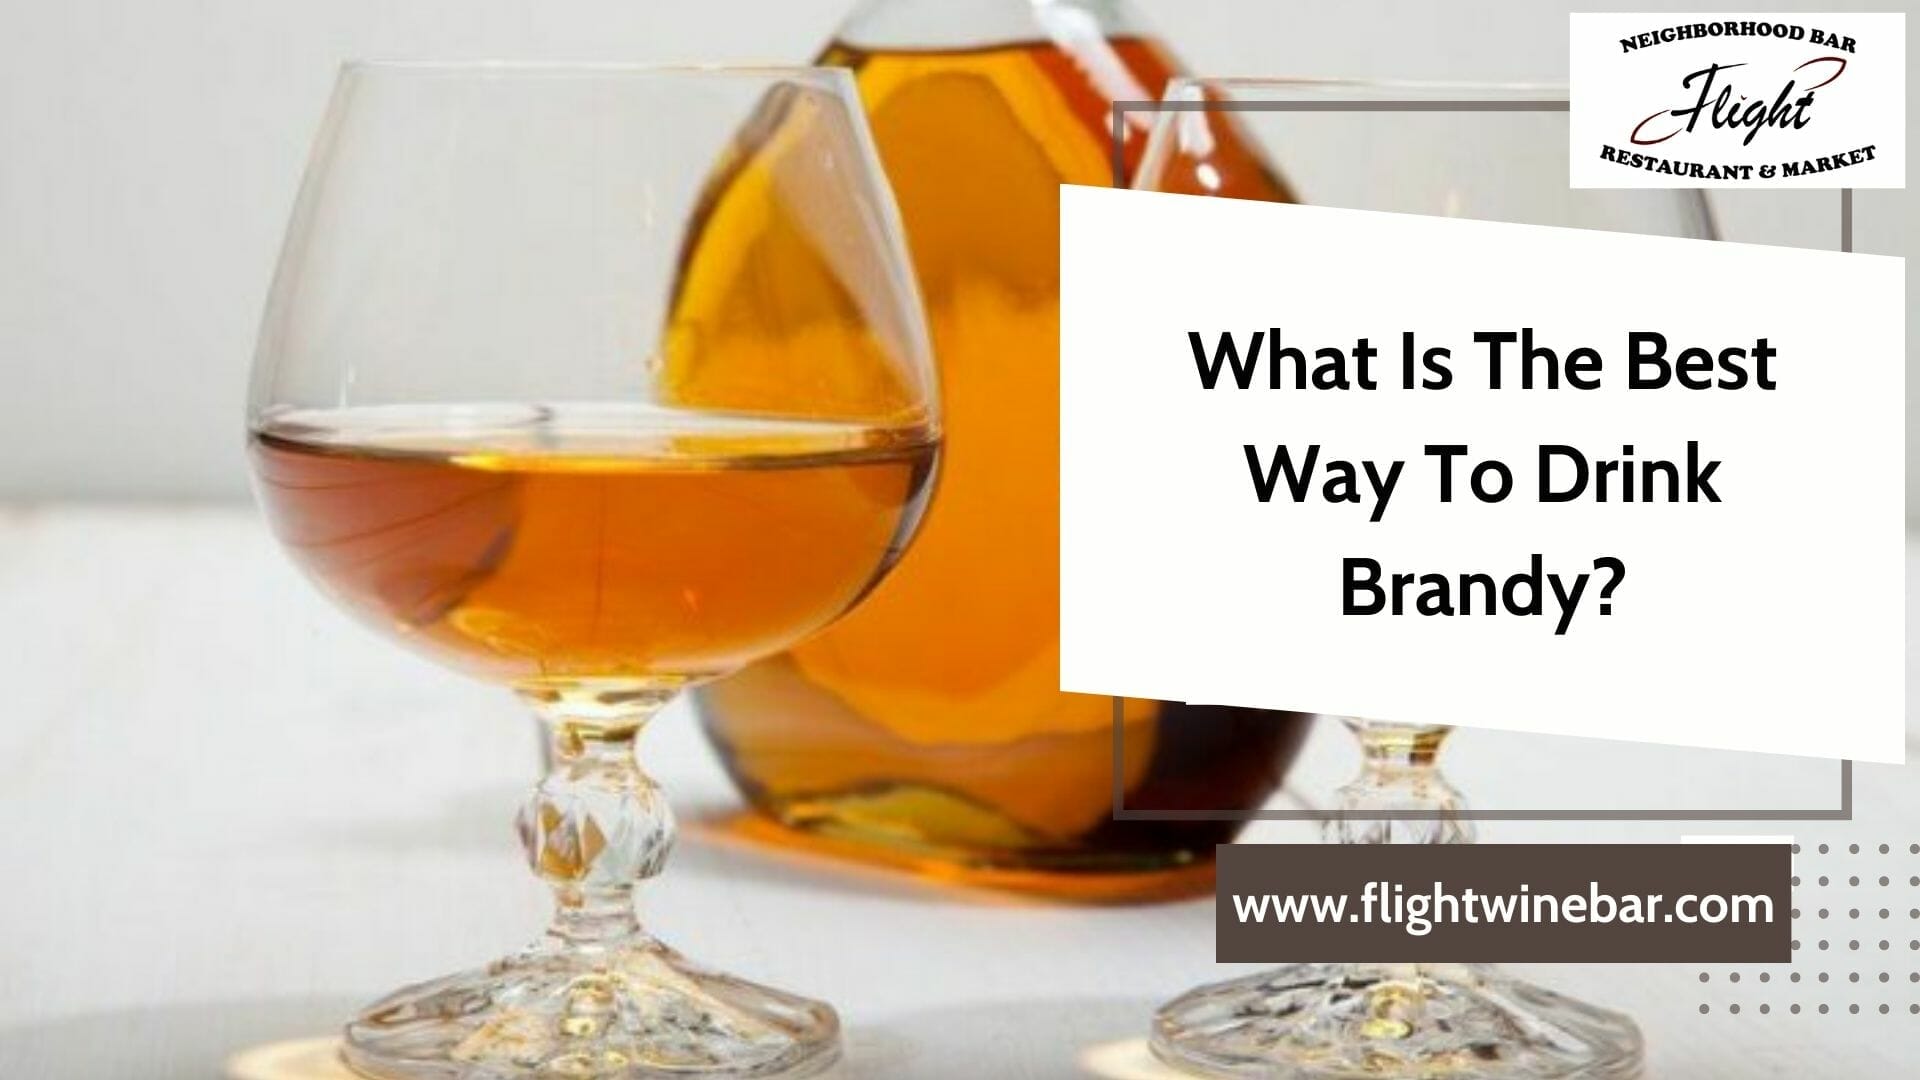 What Is The Best Way To Drink Brandy